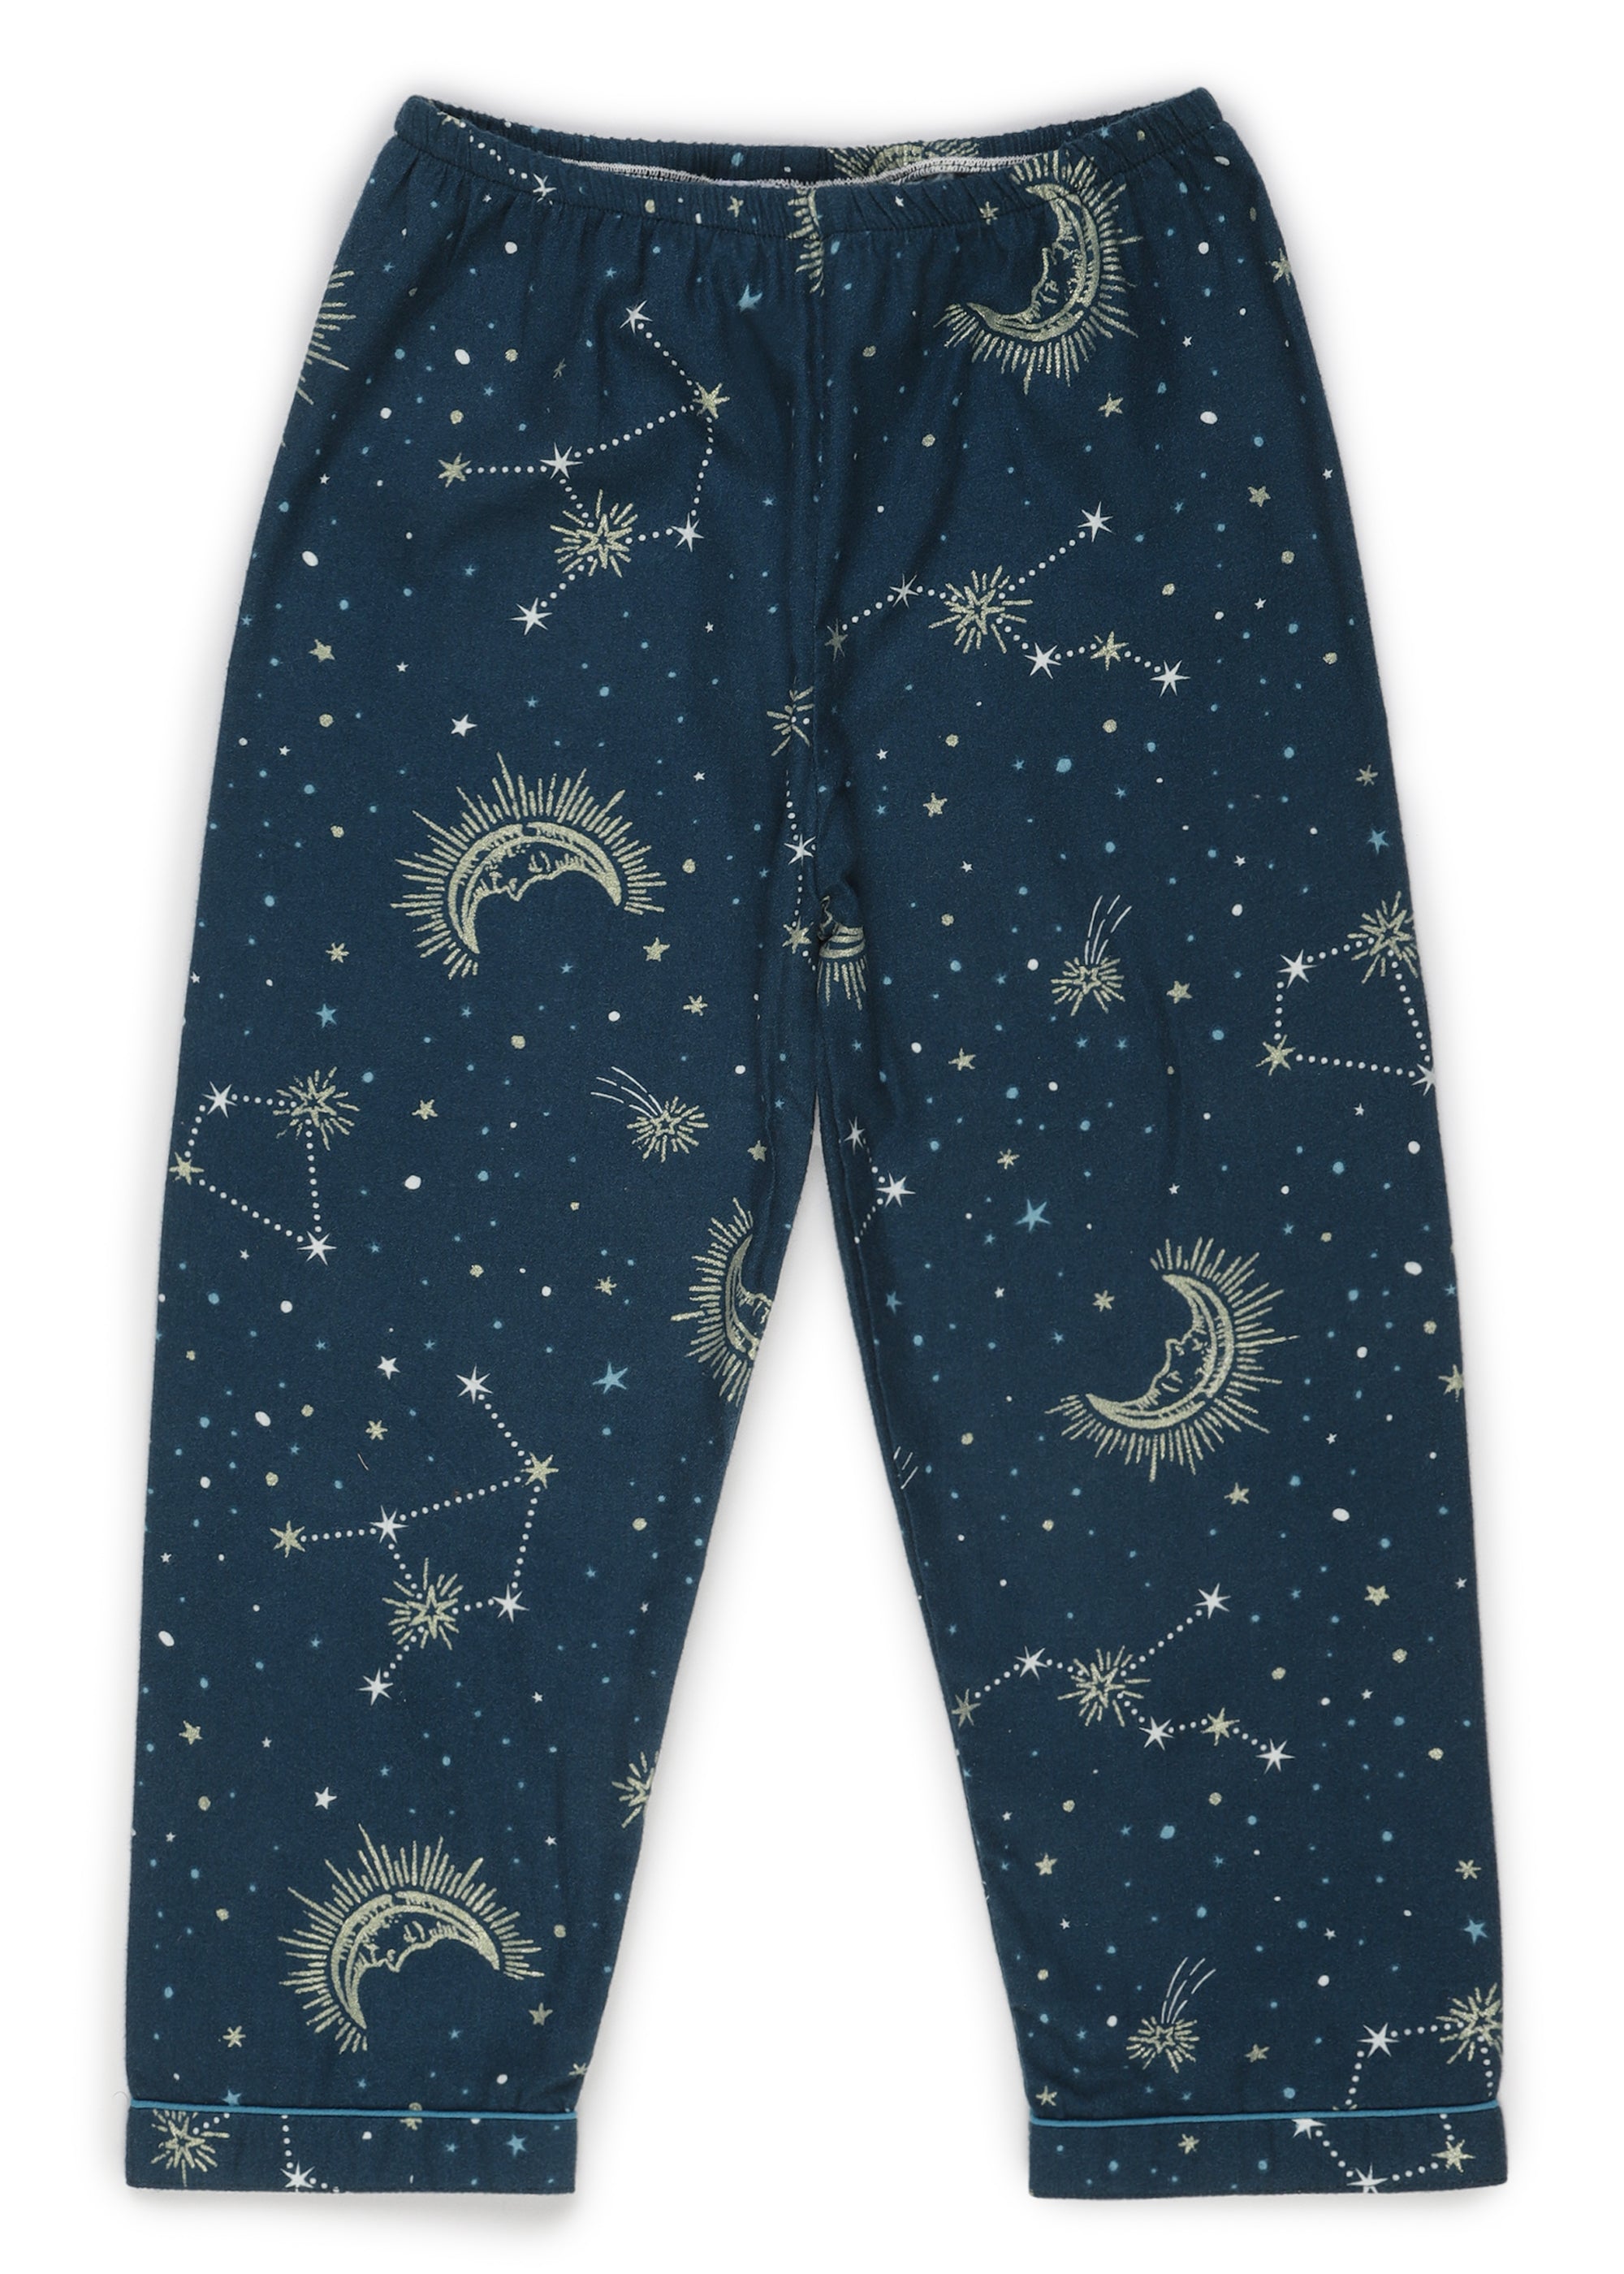 Constellation and Shine Print Cotton Flannel Long Sleeve Kid's Night Suit